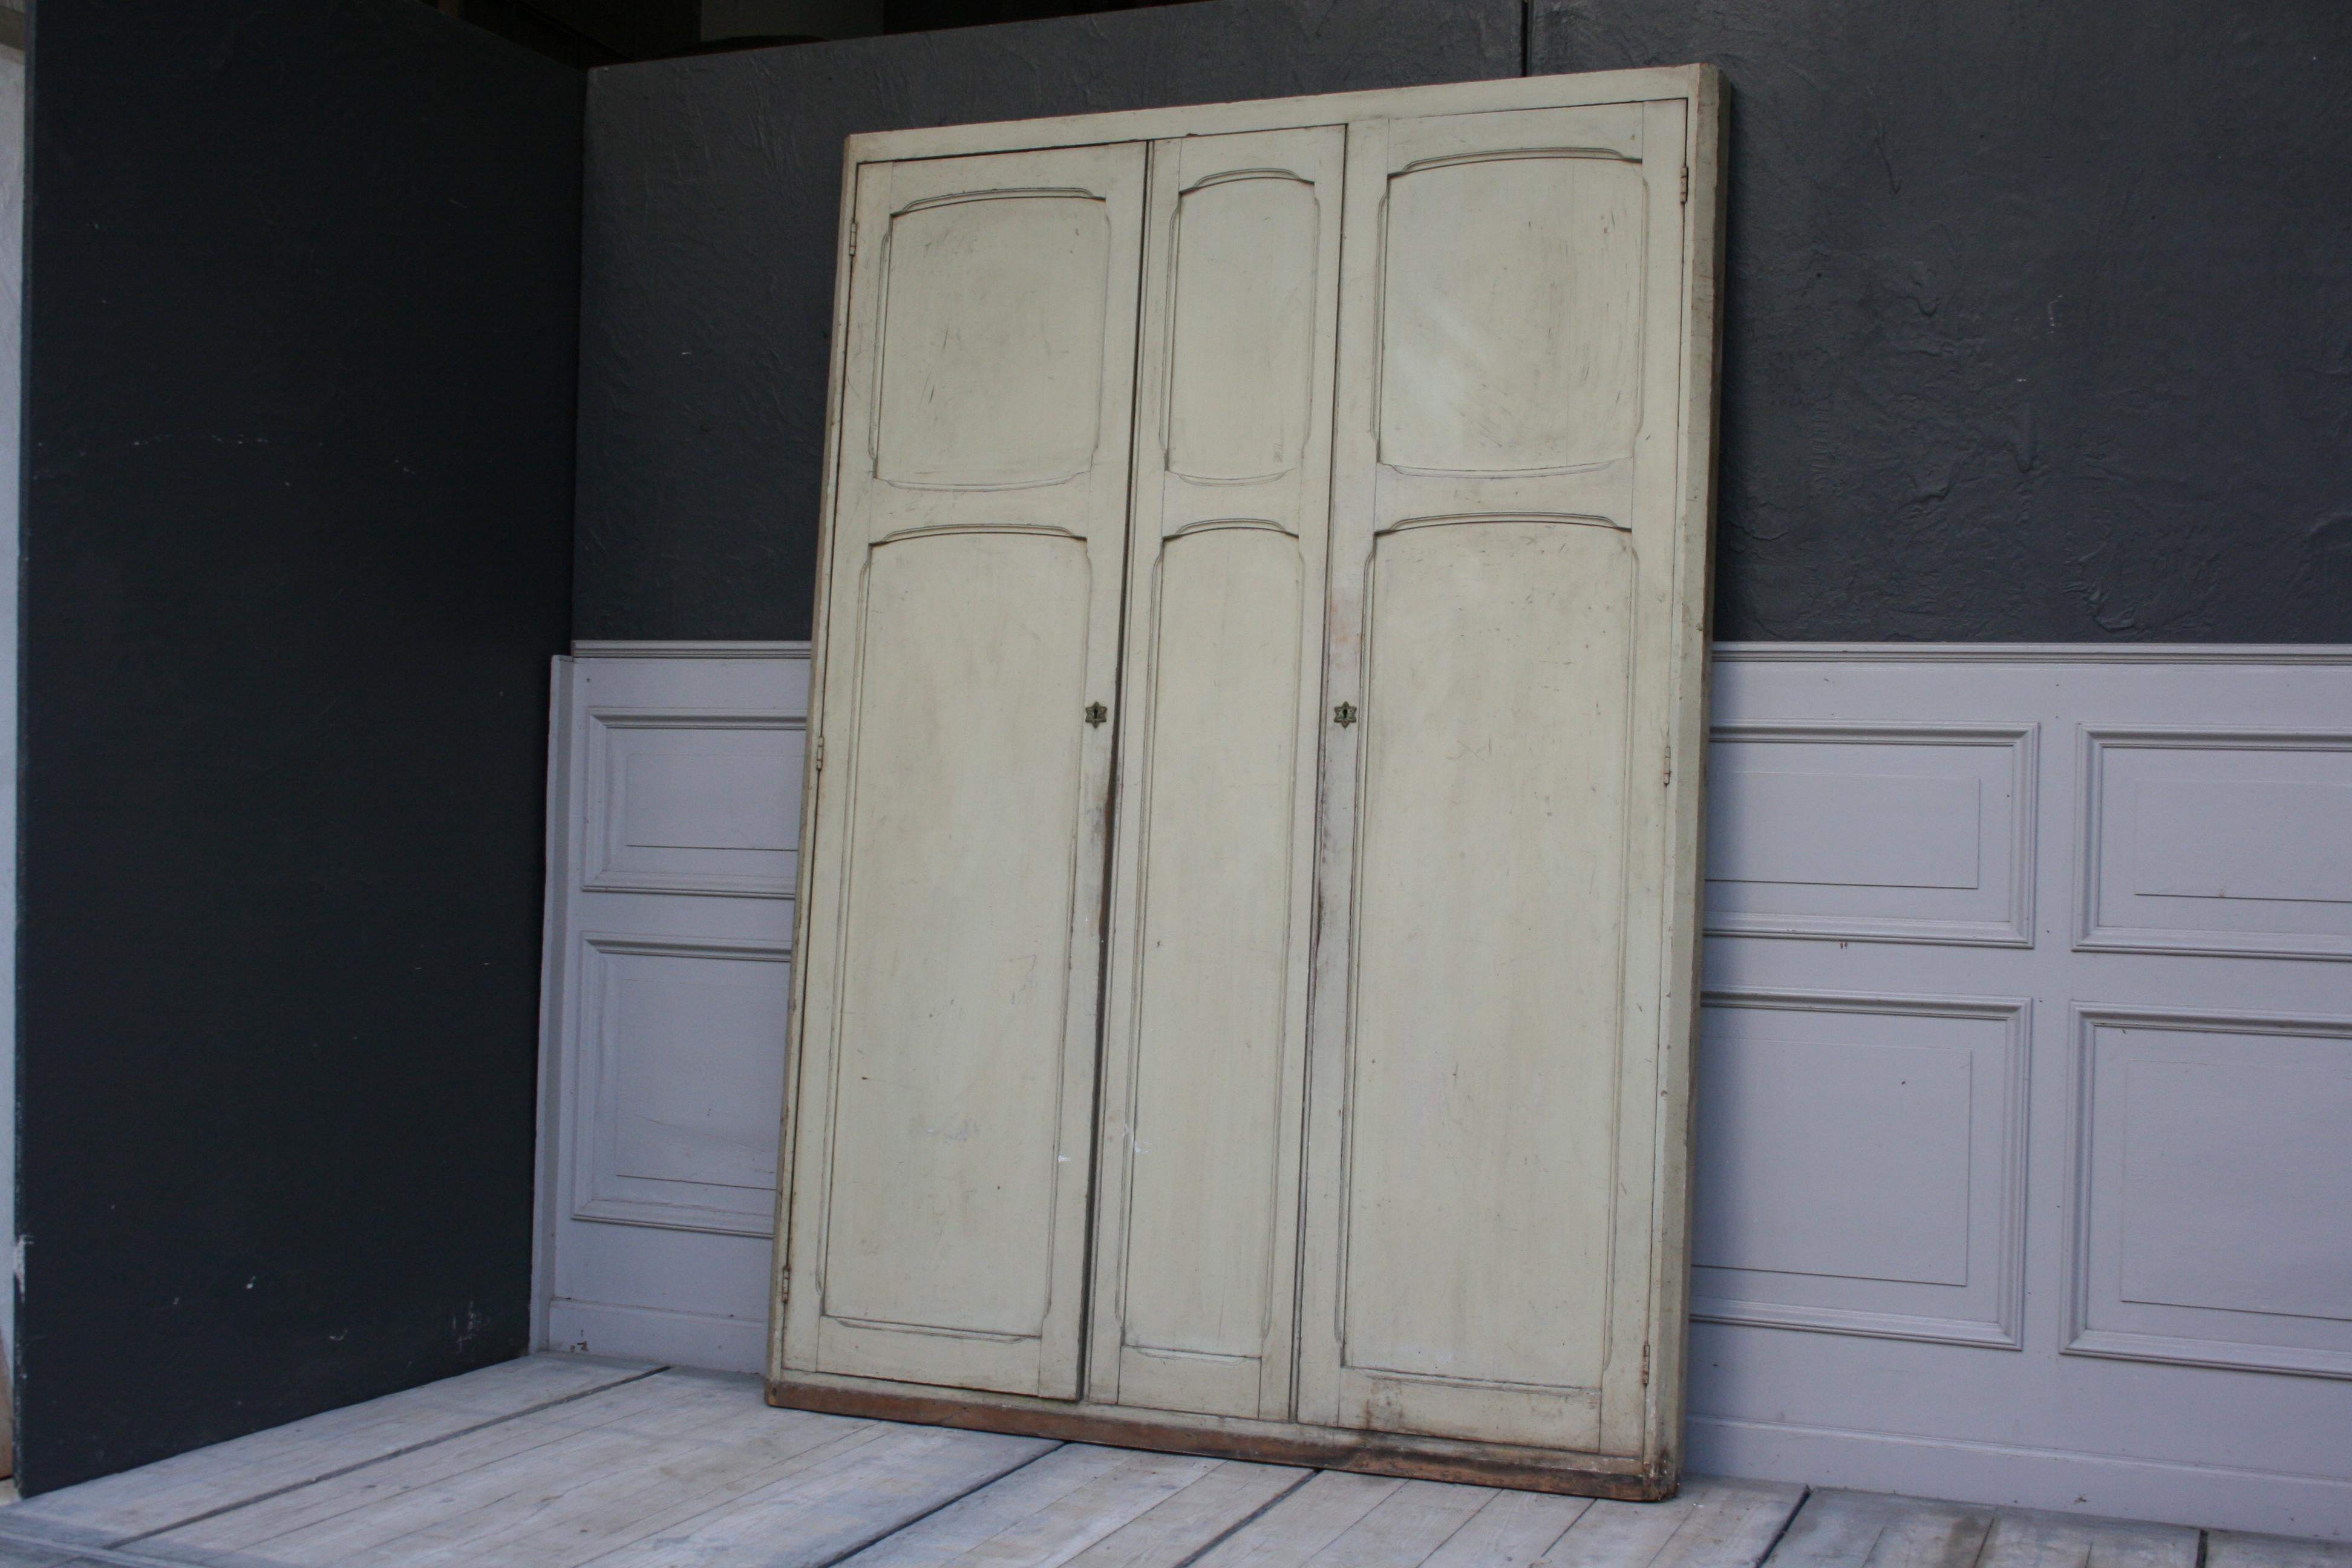 Original old built-in wardrobe front with doors from Germany, circa 1920. Original color patina and really special fittings in star shape. 

Dimensions: 210 cm high, 150 cm wide, 10 cm deep.